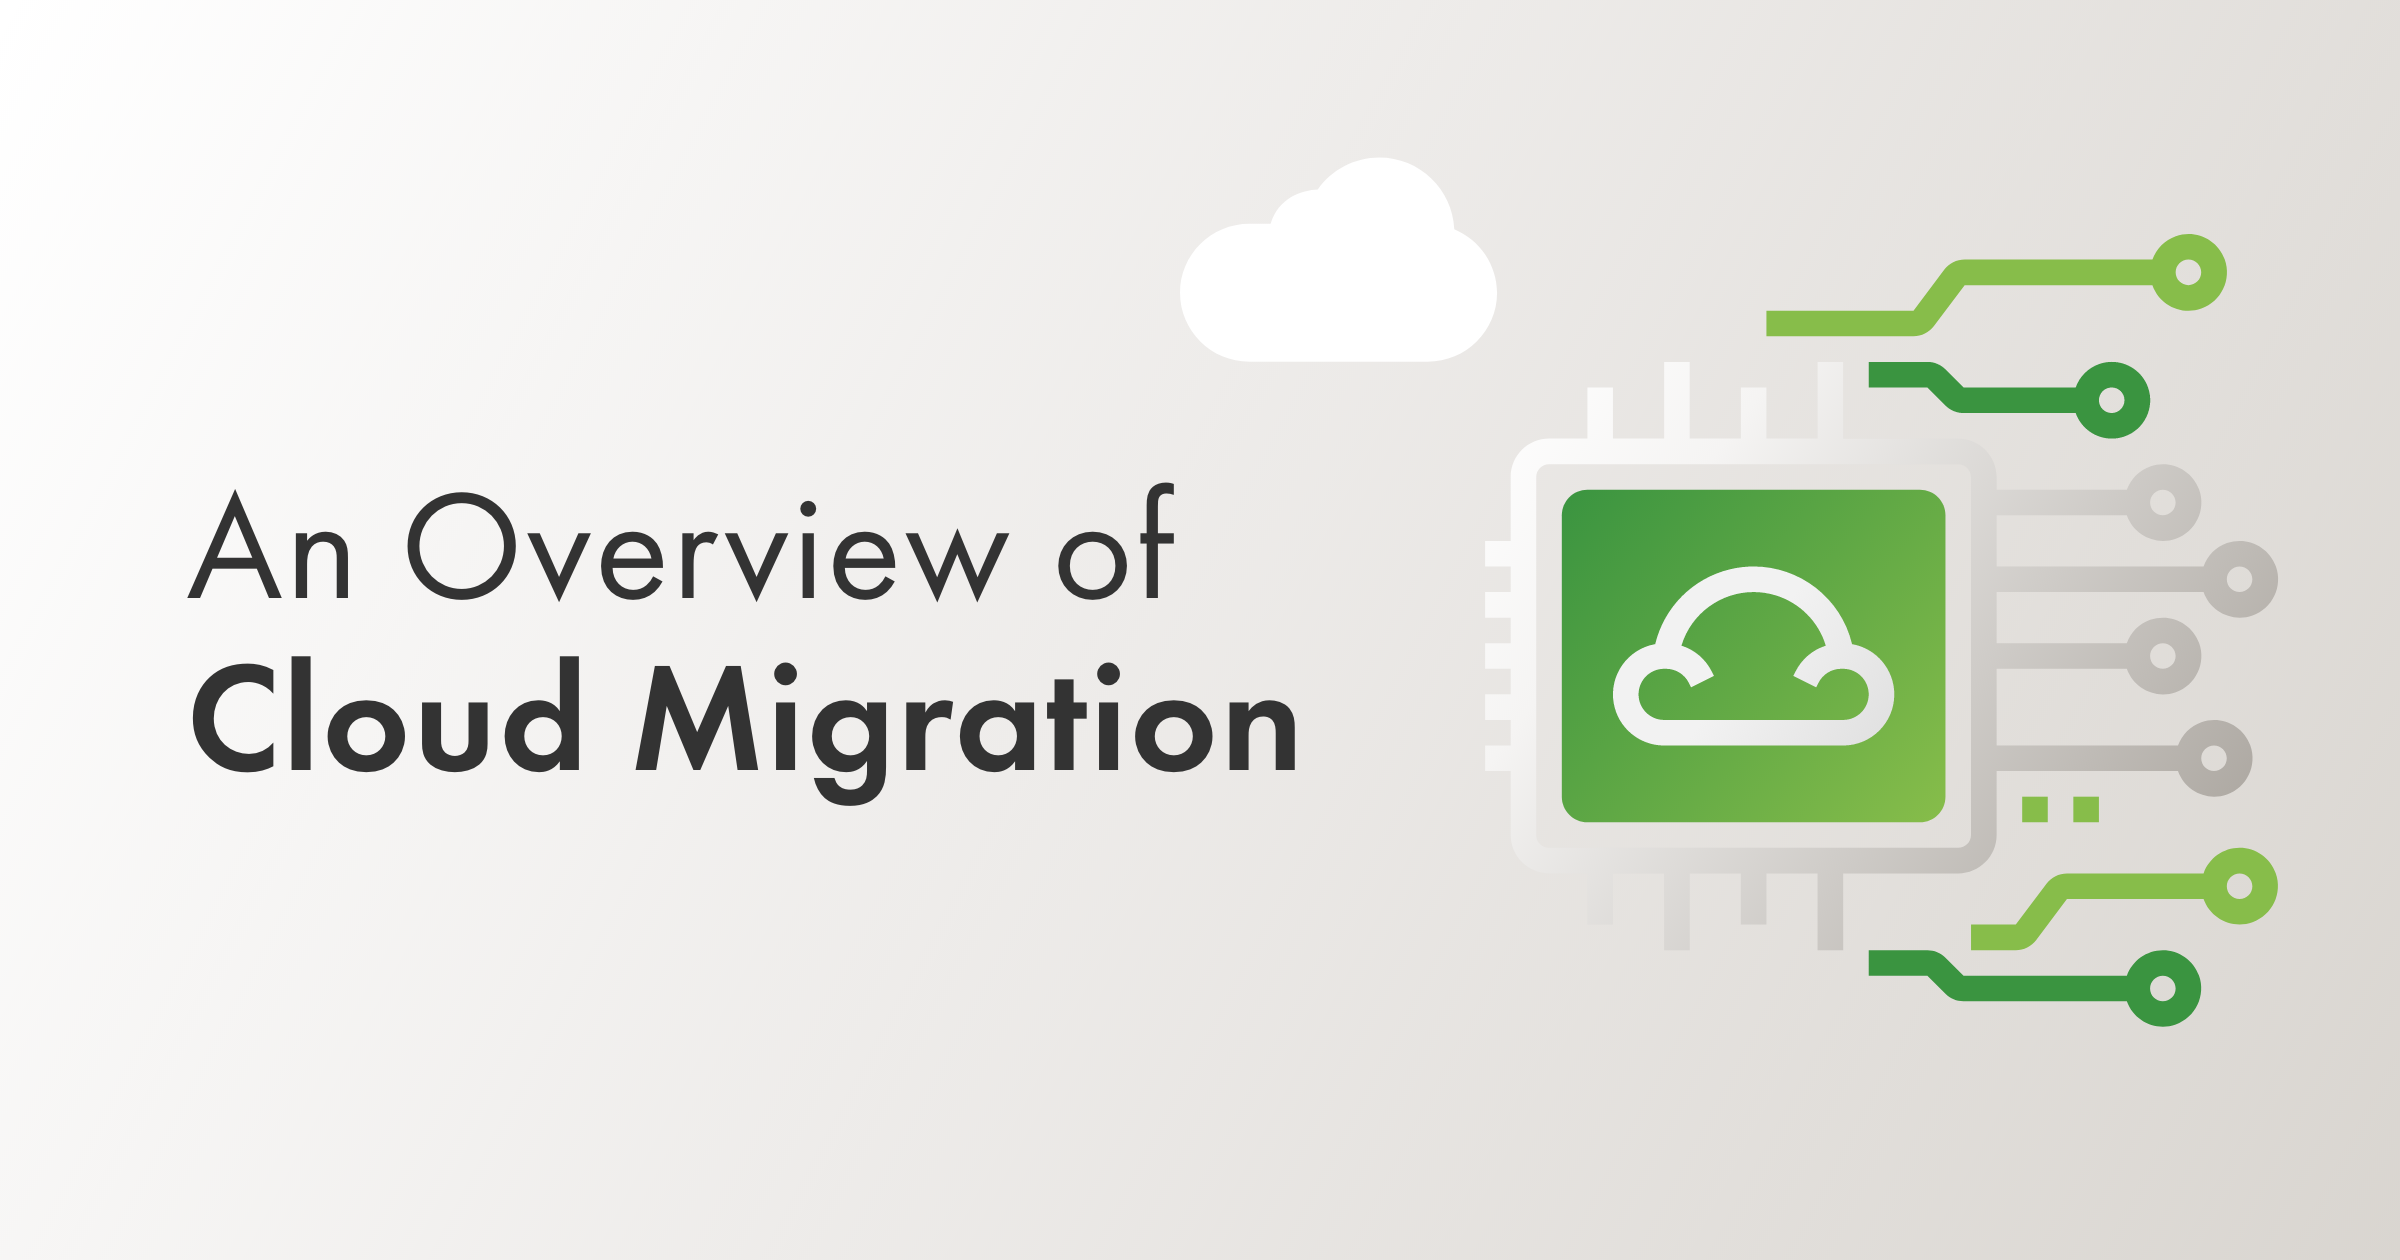 An Overview of Cloud Migration